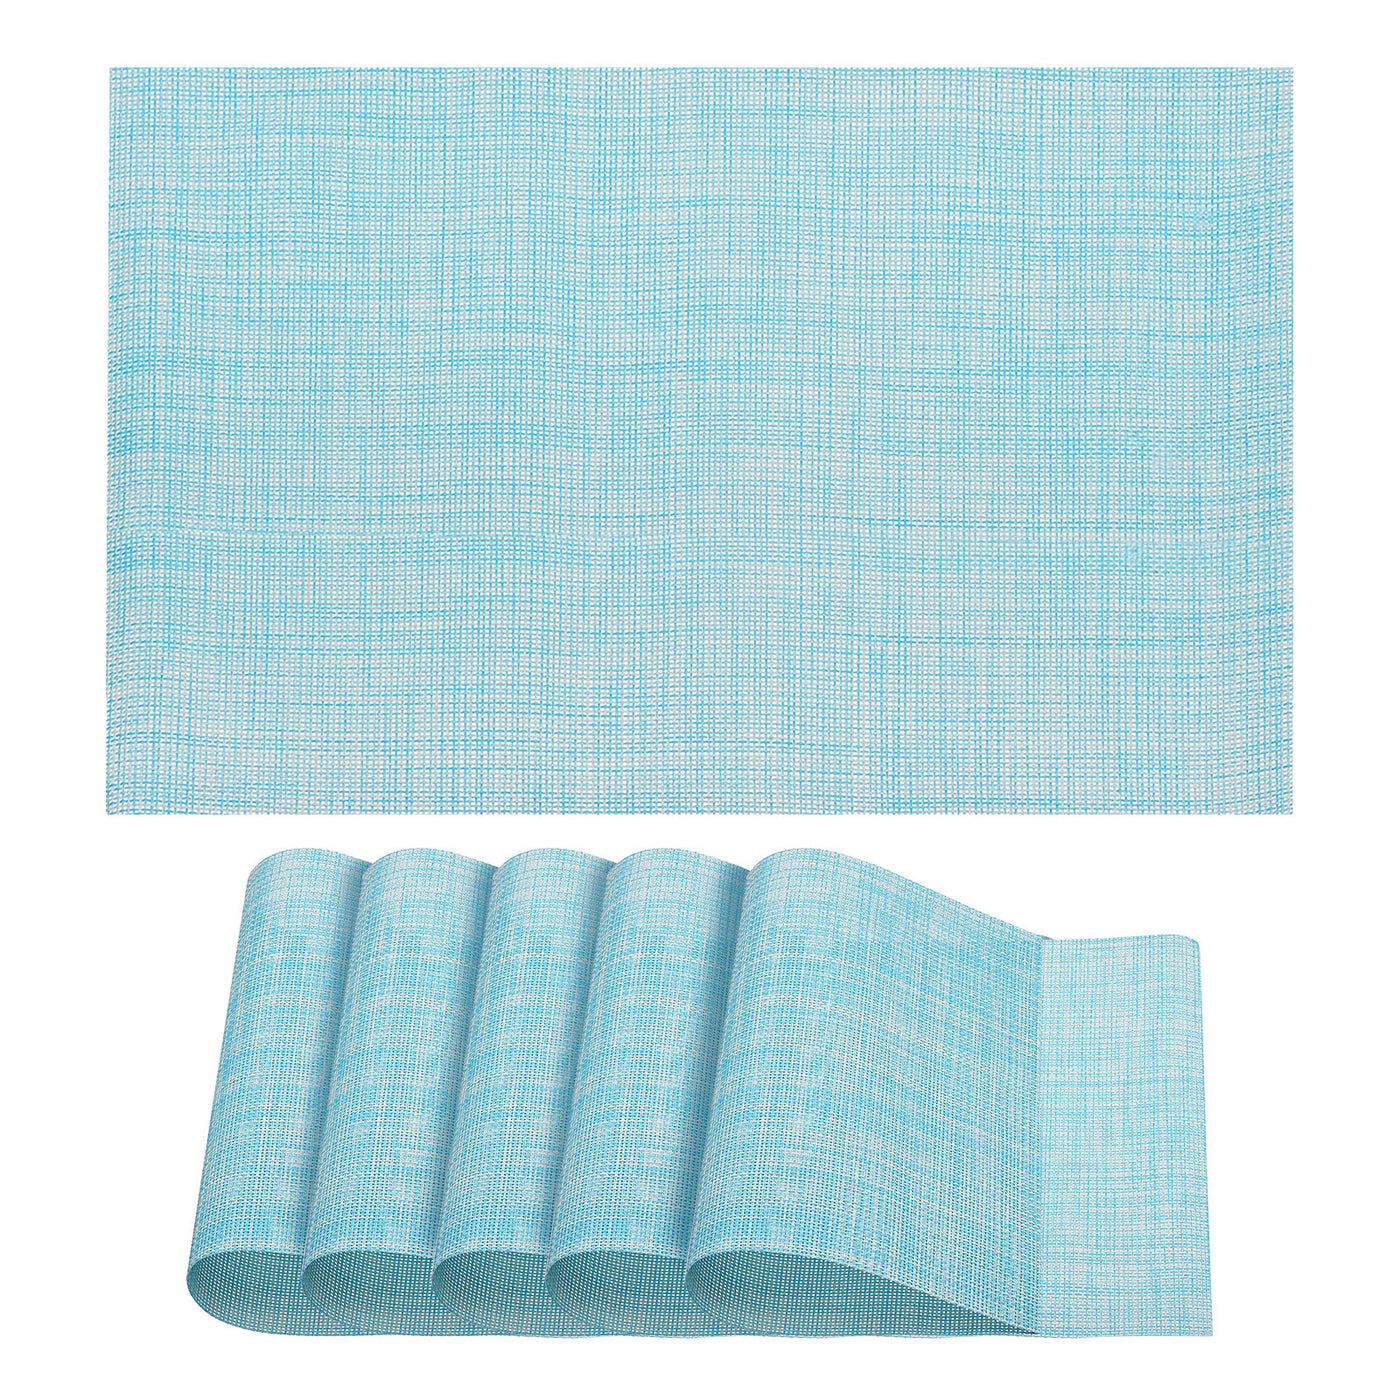 uxcell Uxcell Place Mats, 450x300mm Table Mats Set of 6 PVC Washable Woven Placemat Blue